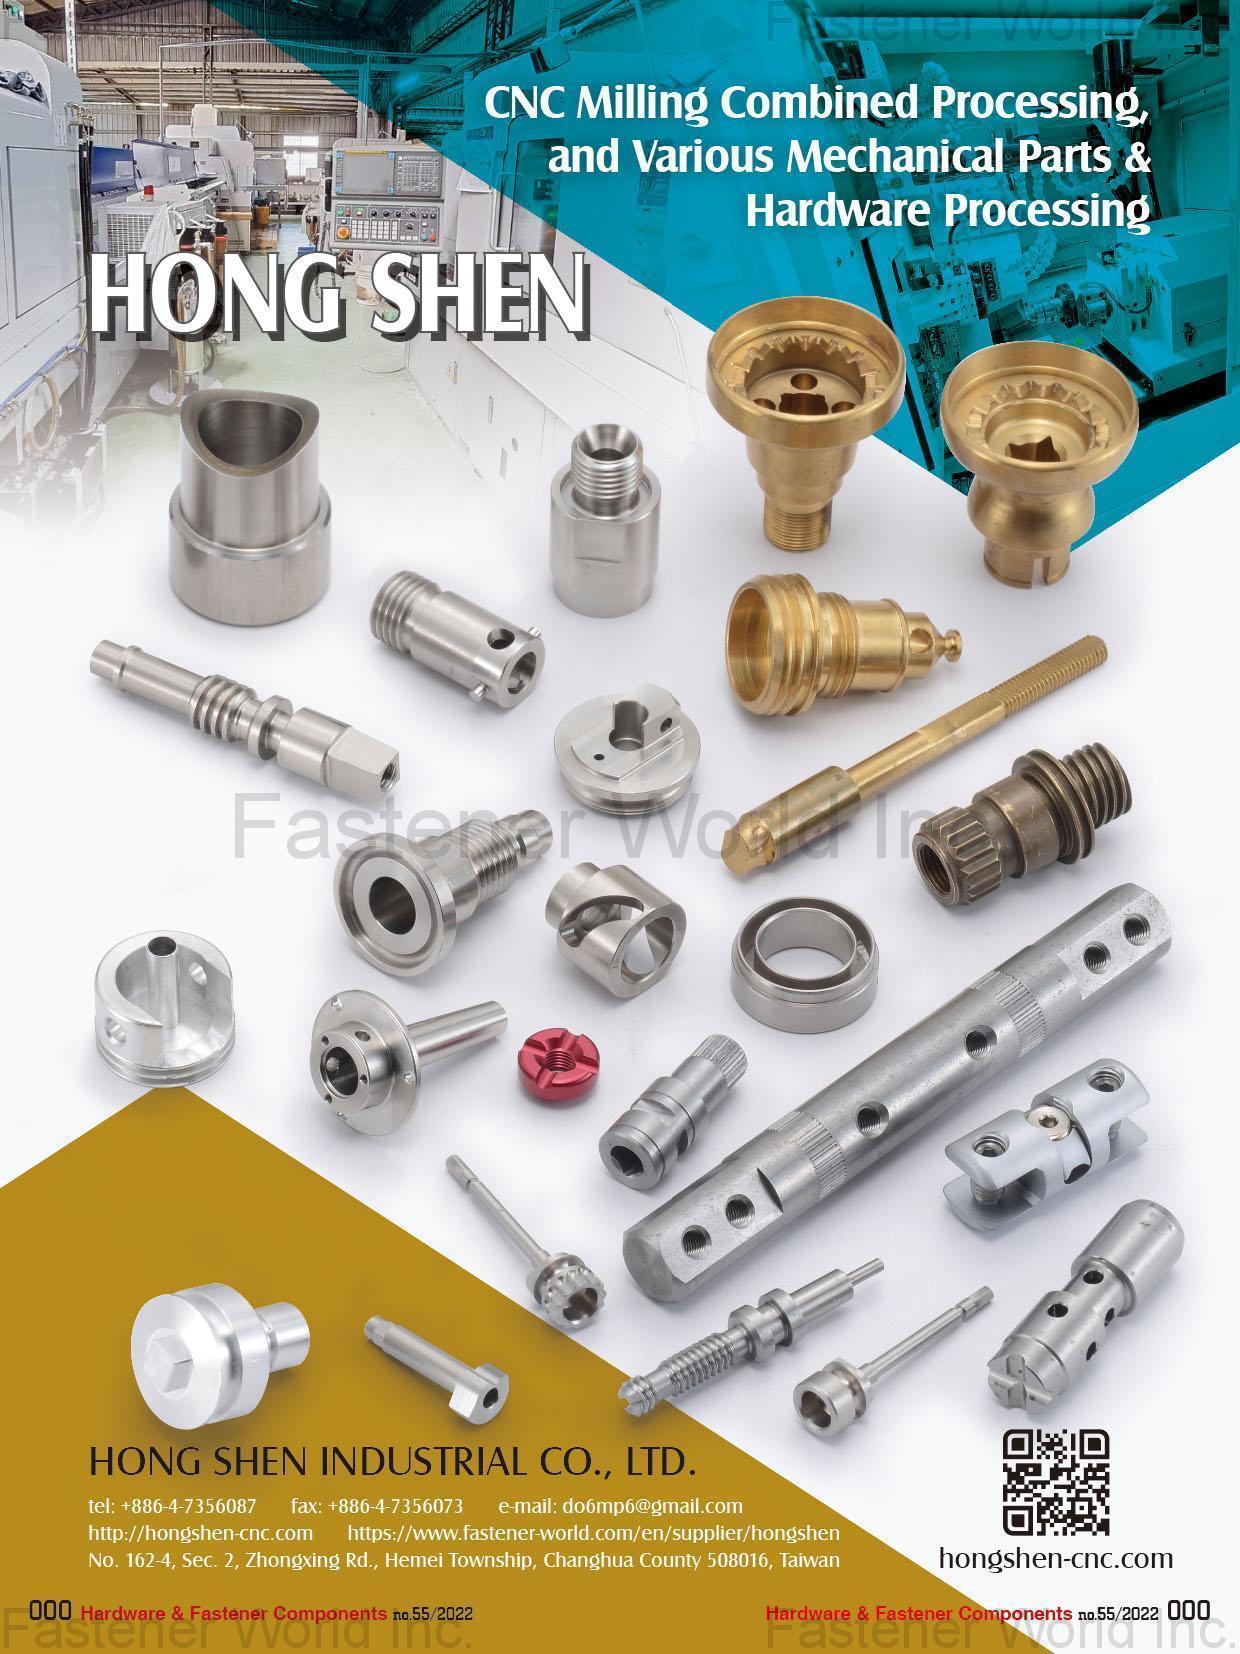 HONG SHEN INDUSTRIAL CO., LTD. , CNC Milling Combined Processing, and Various Mechanical Parts & Hardware Processing